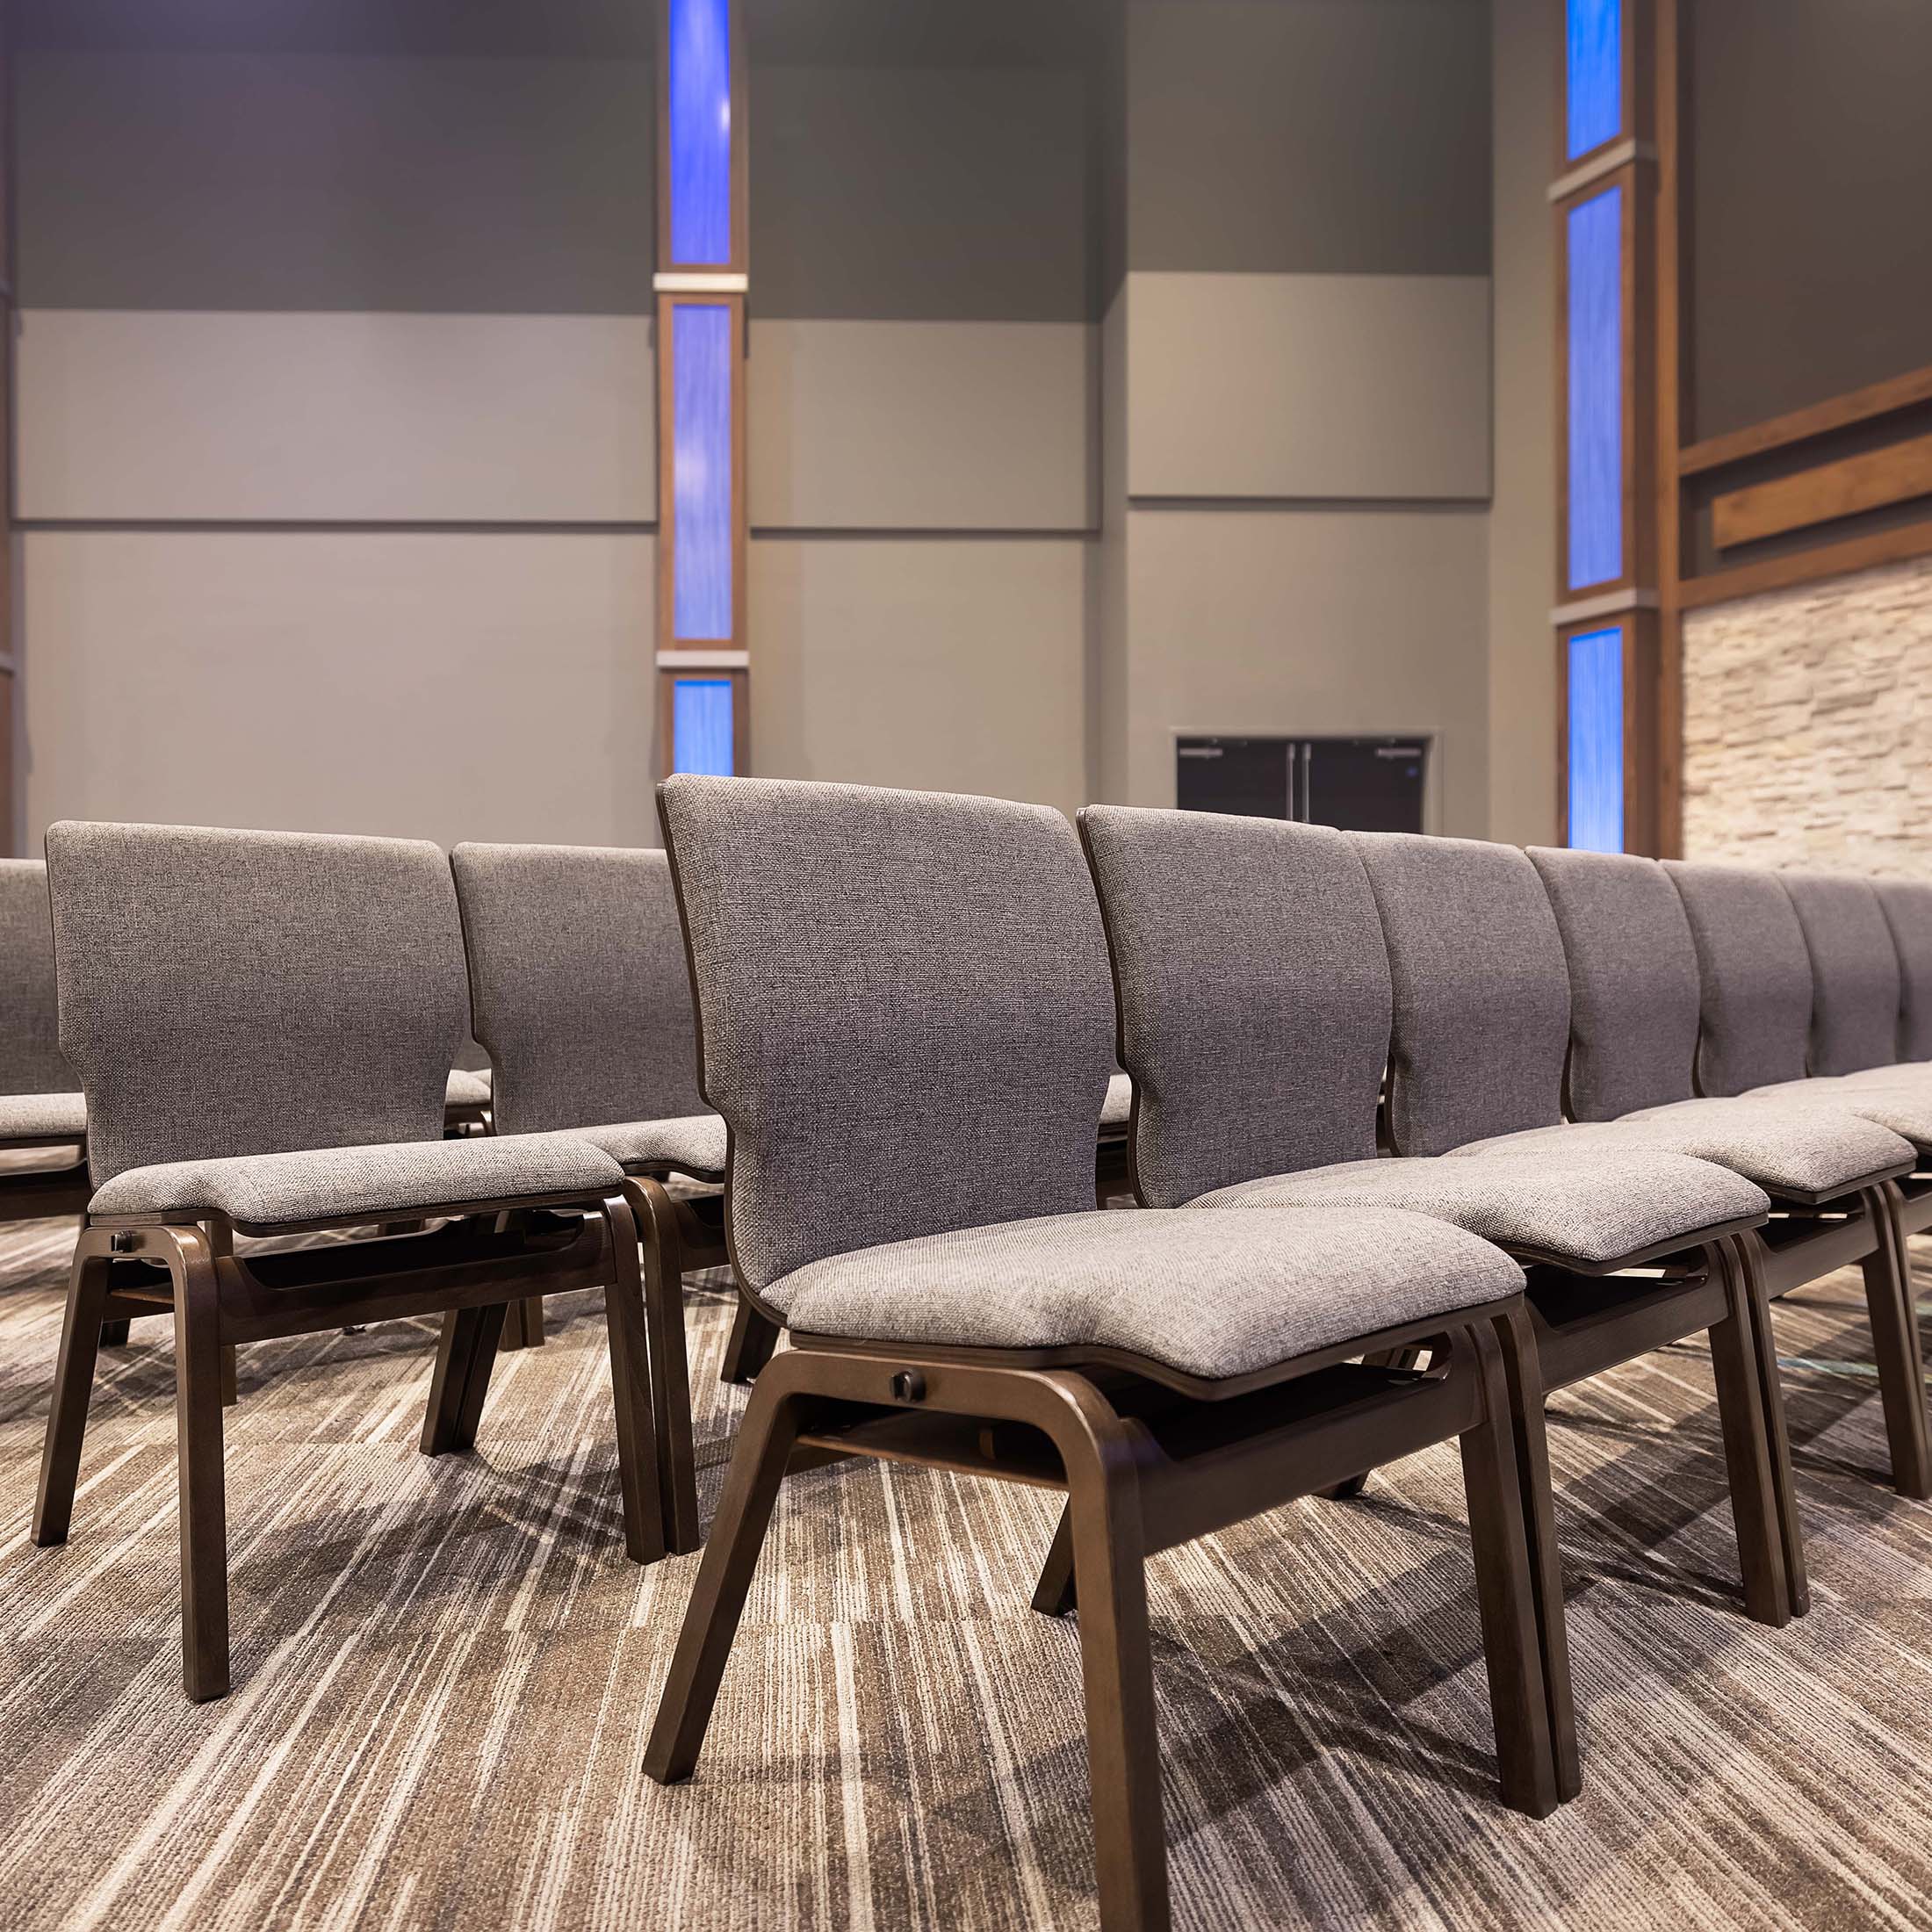 Vantage Chairs in Genoa Baptist Church located in Westerville, OH